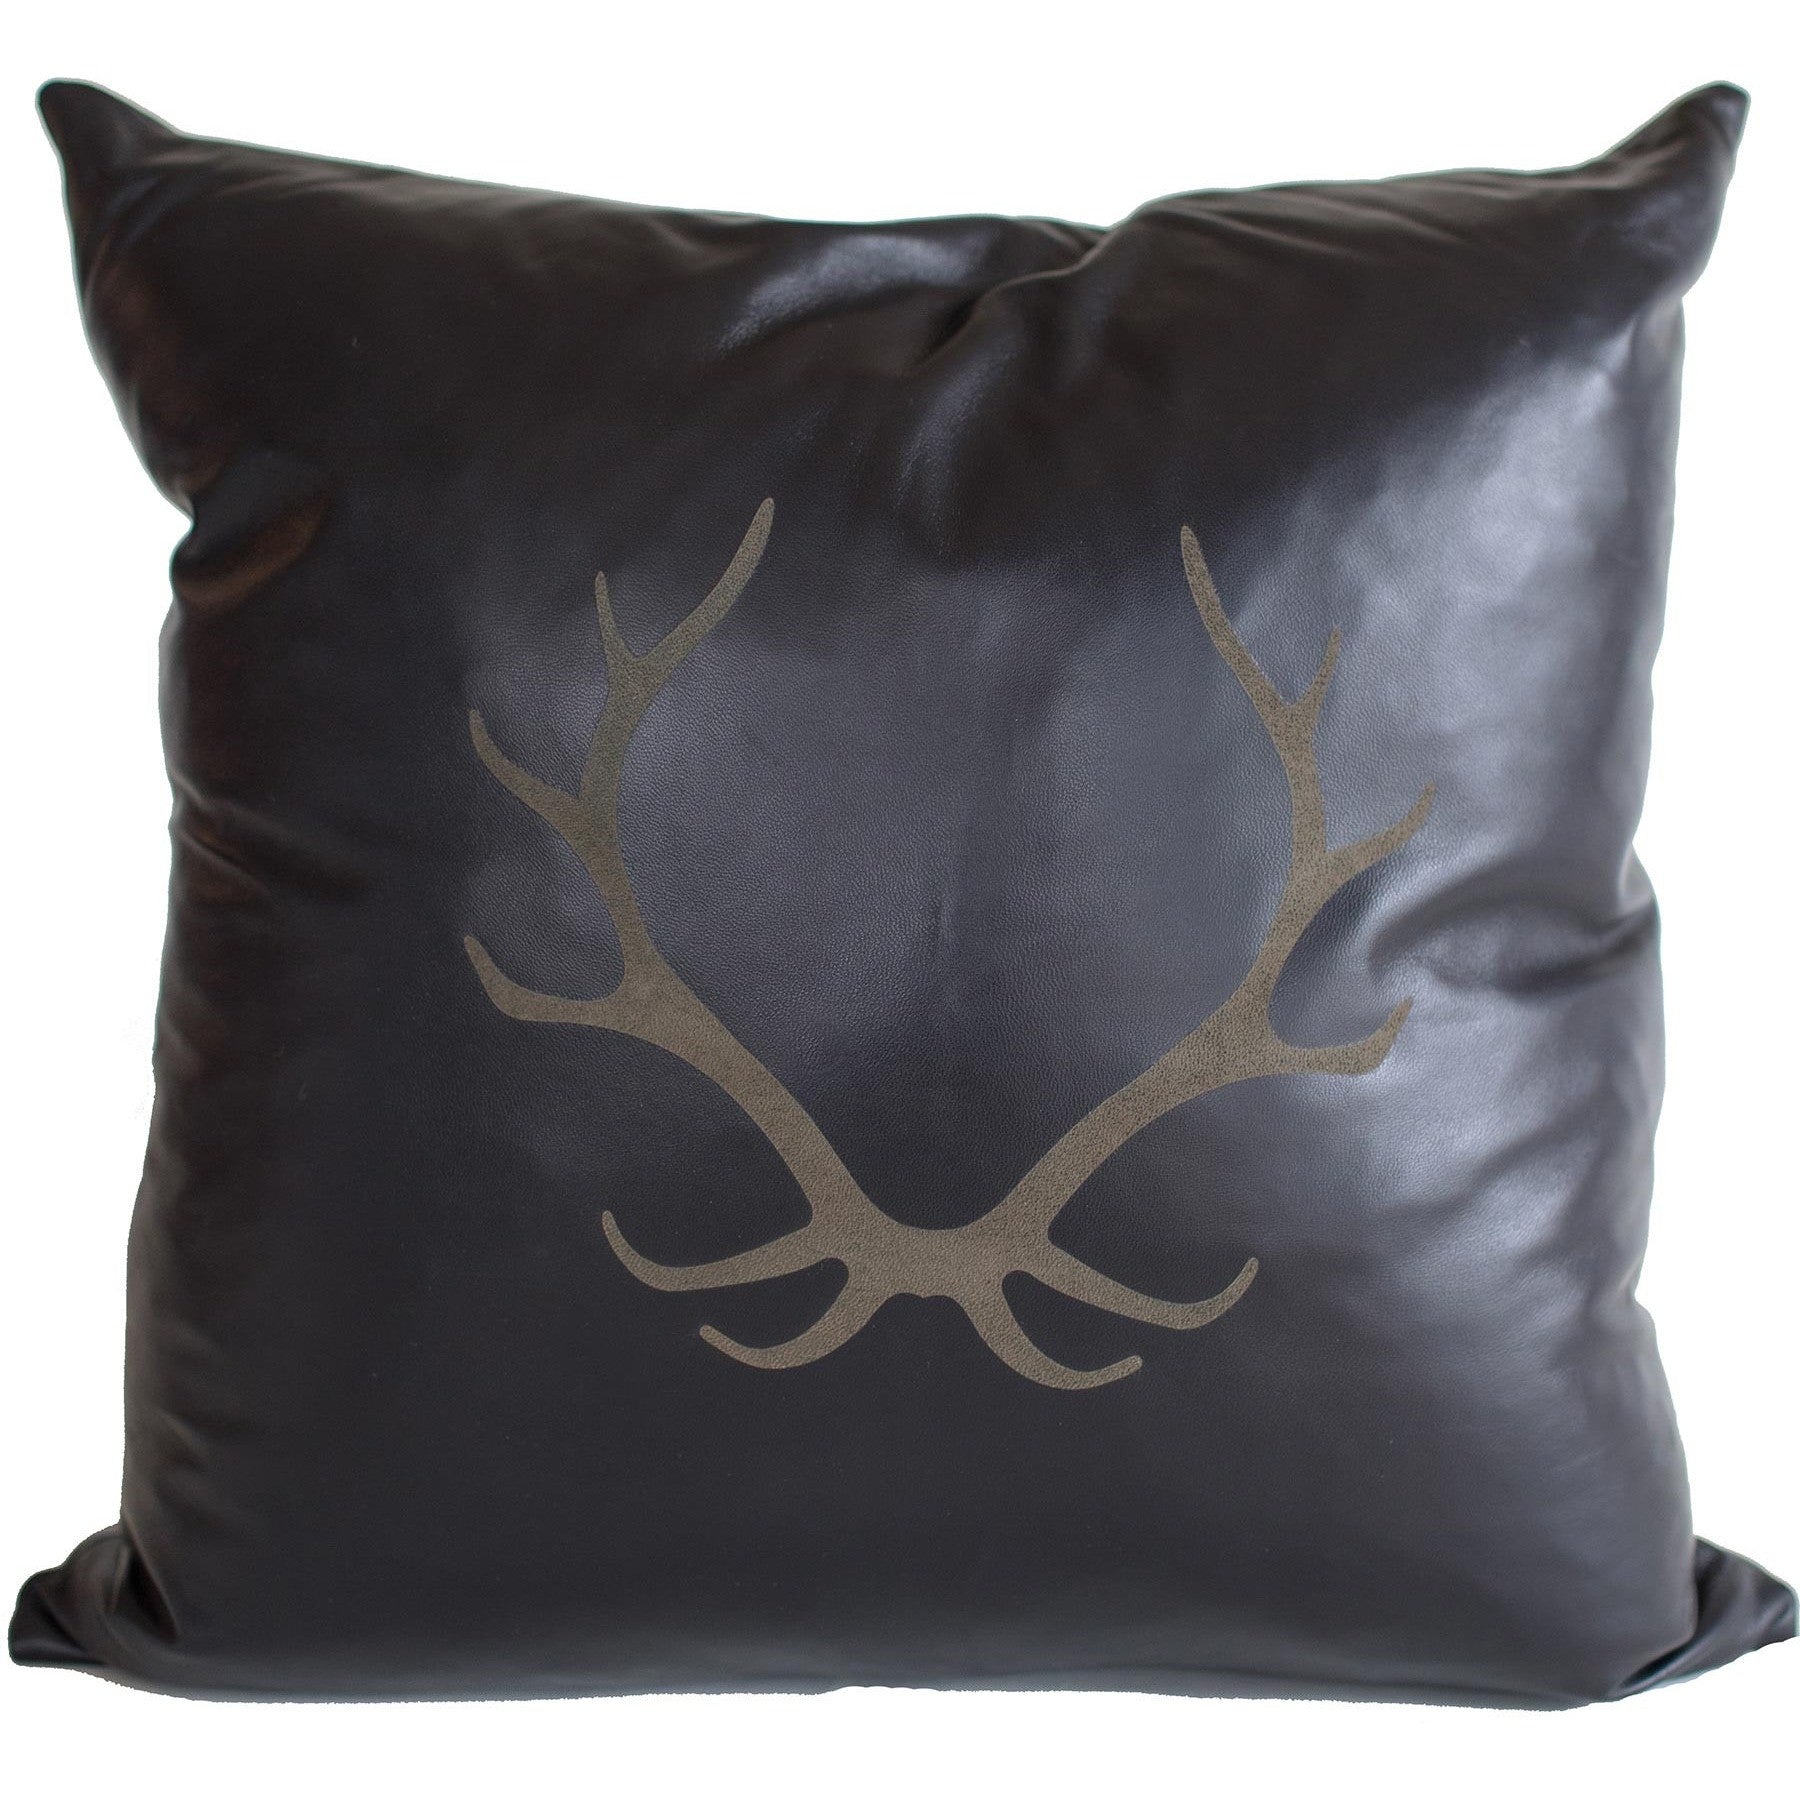 Cabin Leather Throw Pillow.